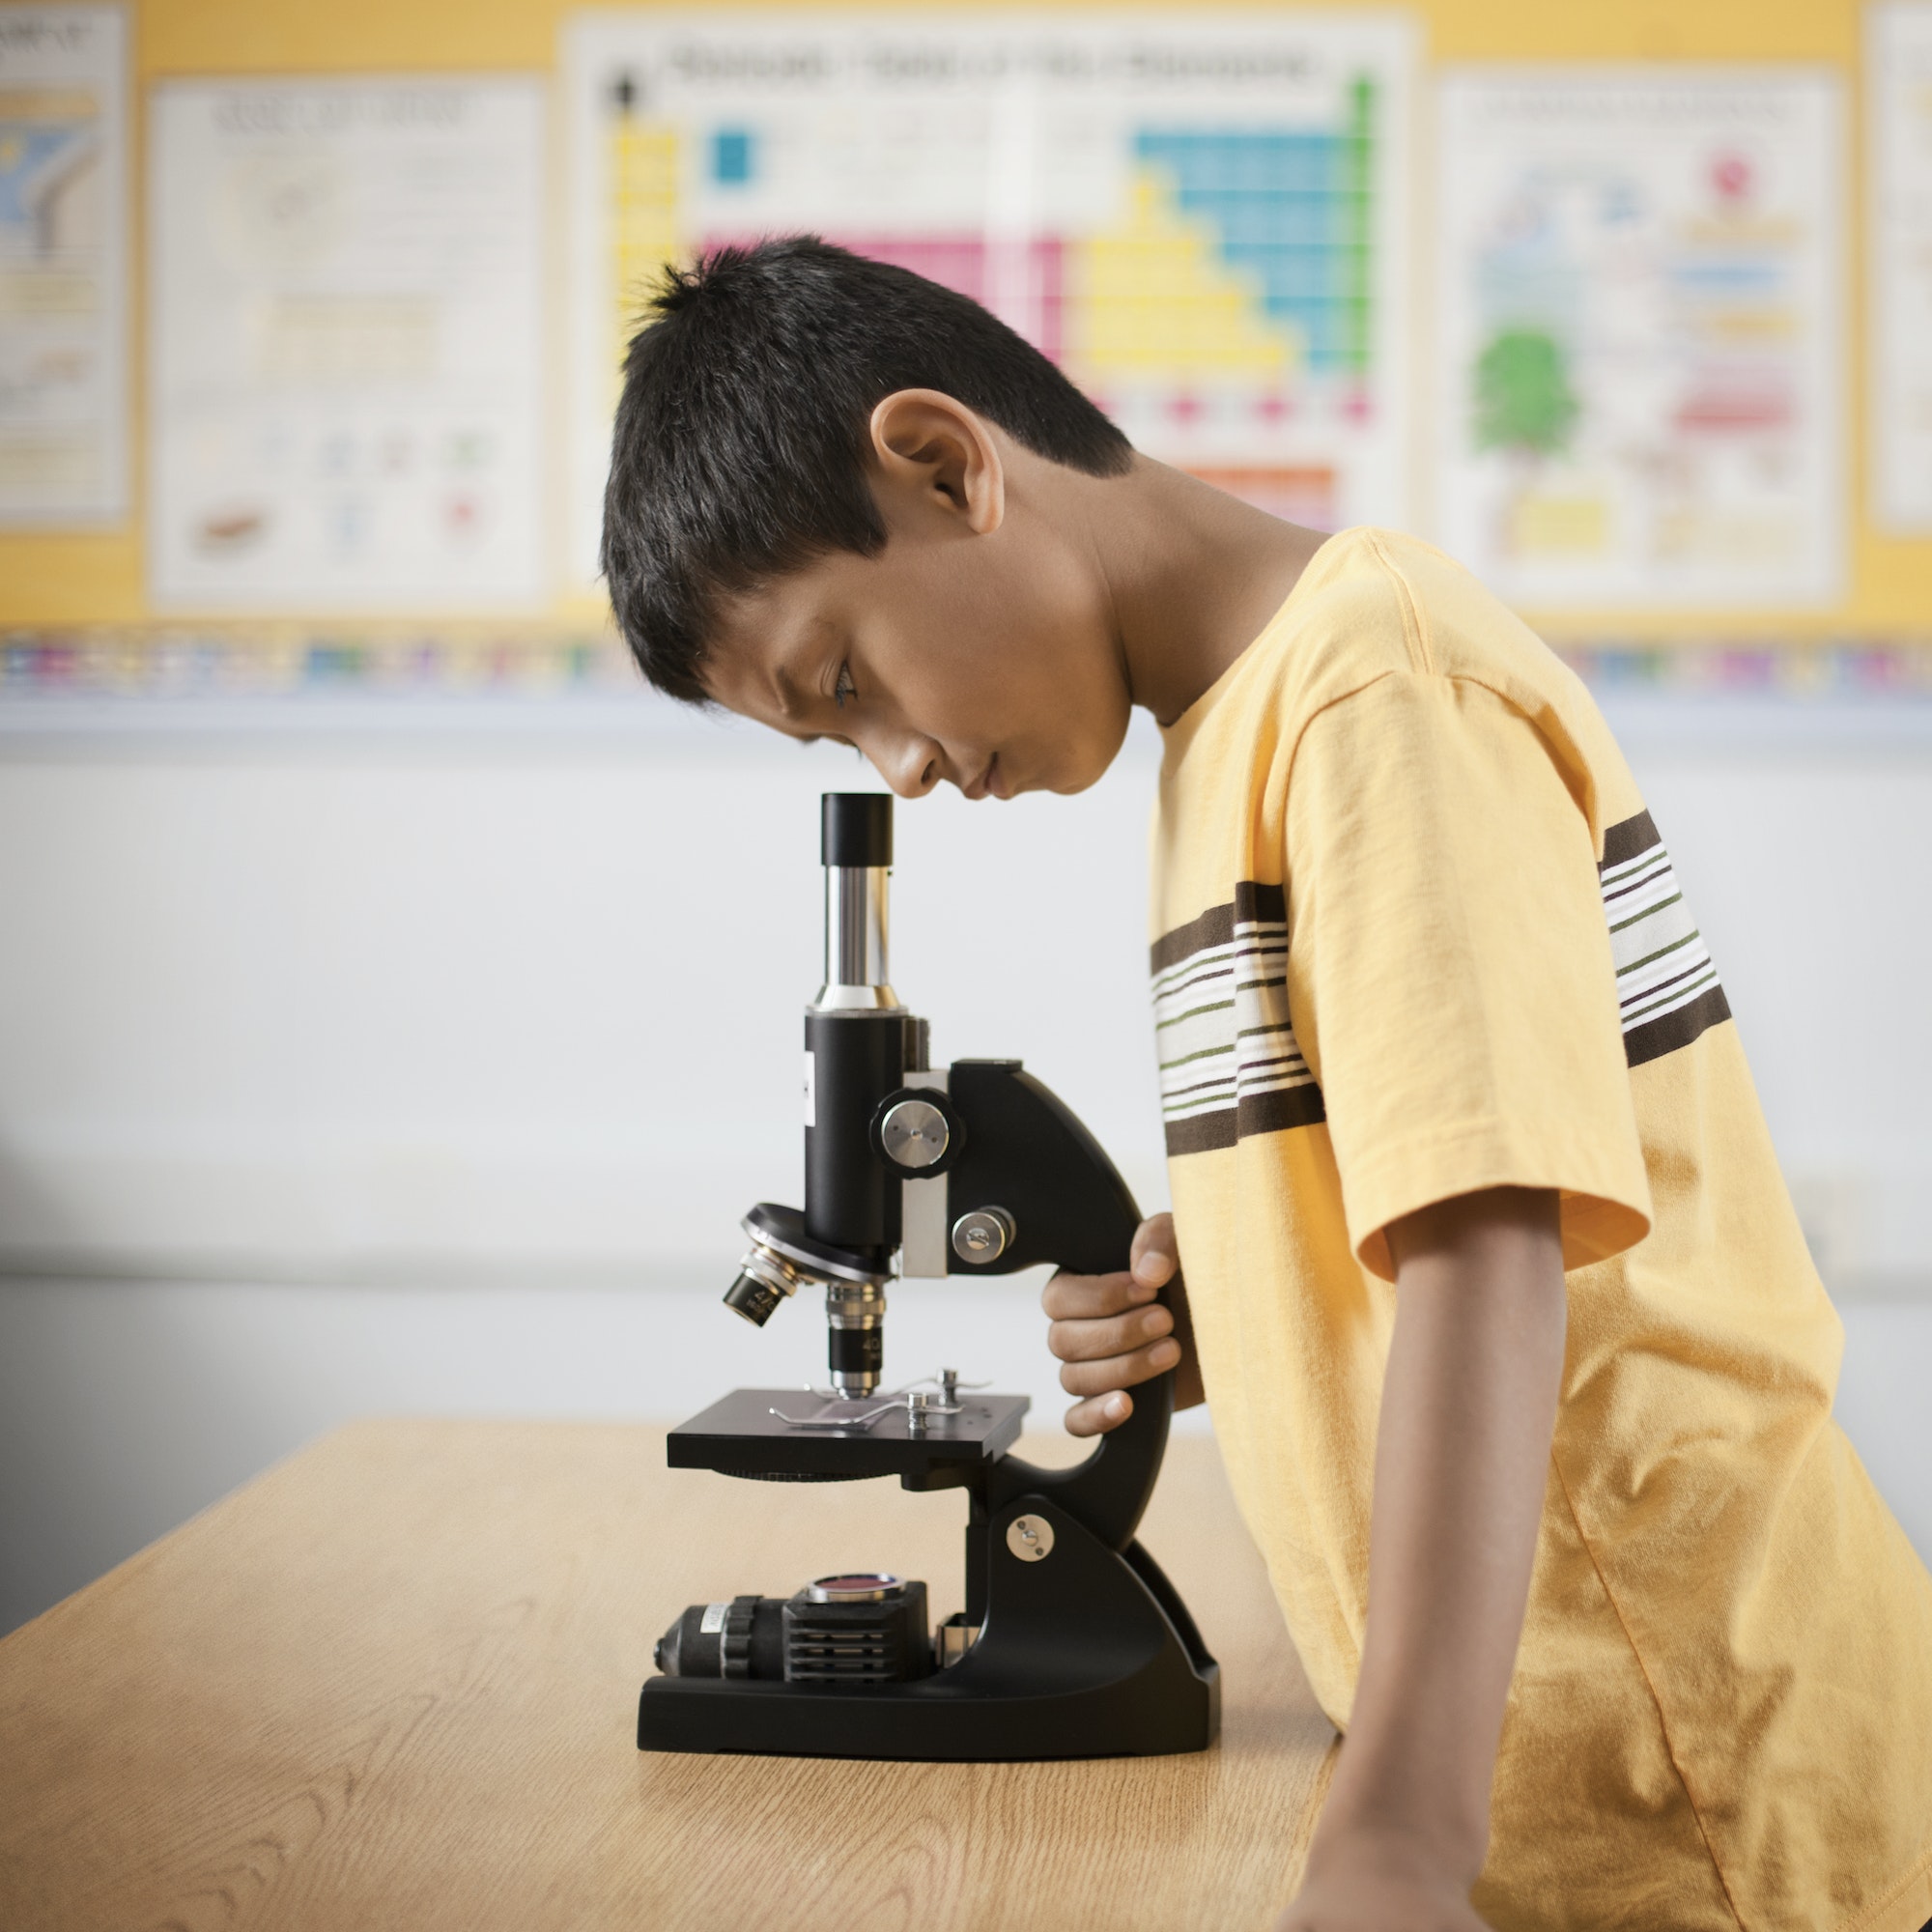 A boy using a microscope in a science lesson.